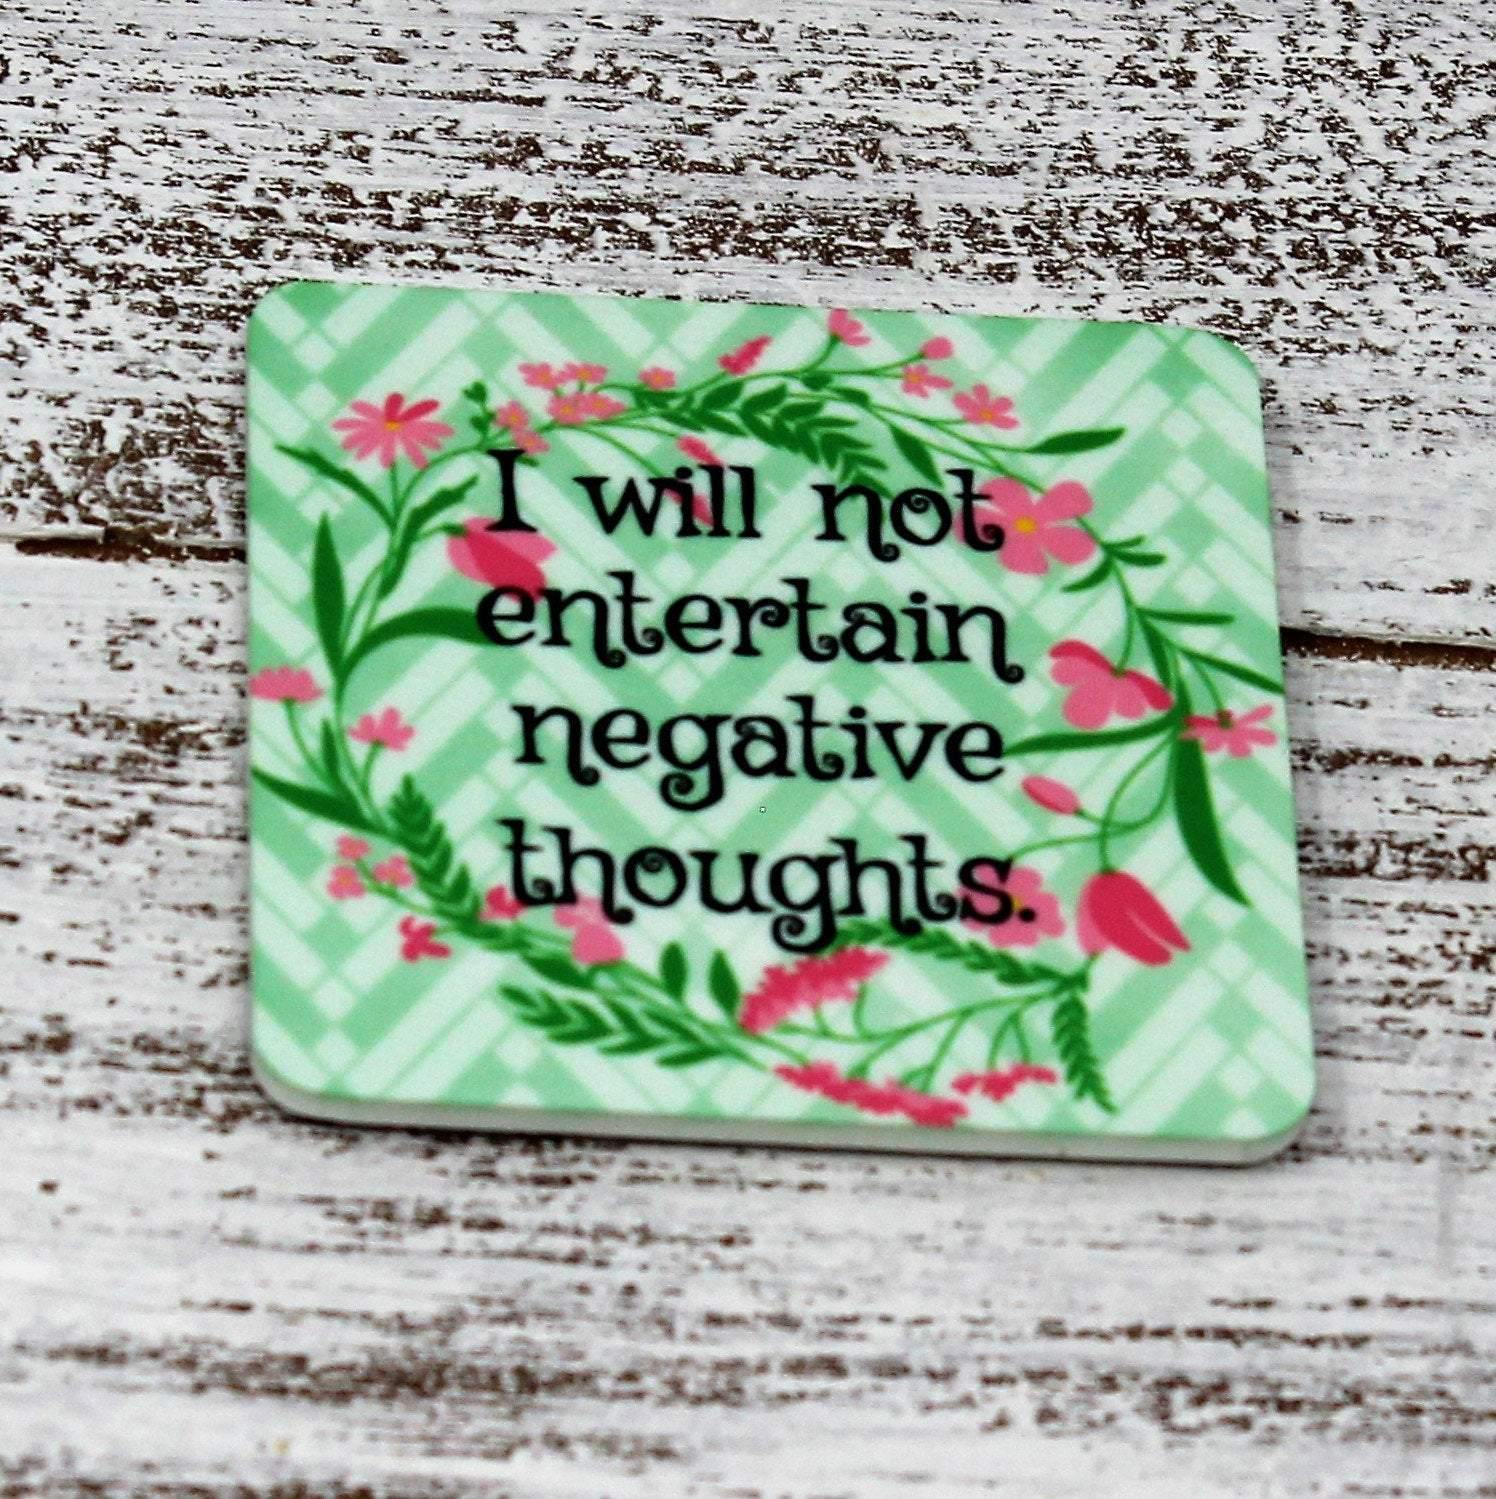 Personalized Magnet | Custom Photo Magnet | Negative Thoughts - This & That Solutions - Personalized Magnet | Custom Photo Magnet | Negative Thoughts - Personalized Gifts & Custom Home Decor